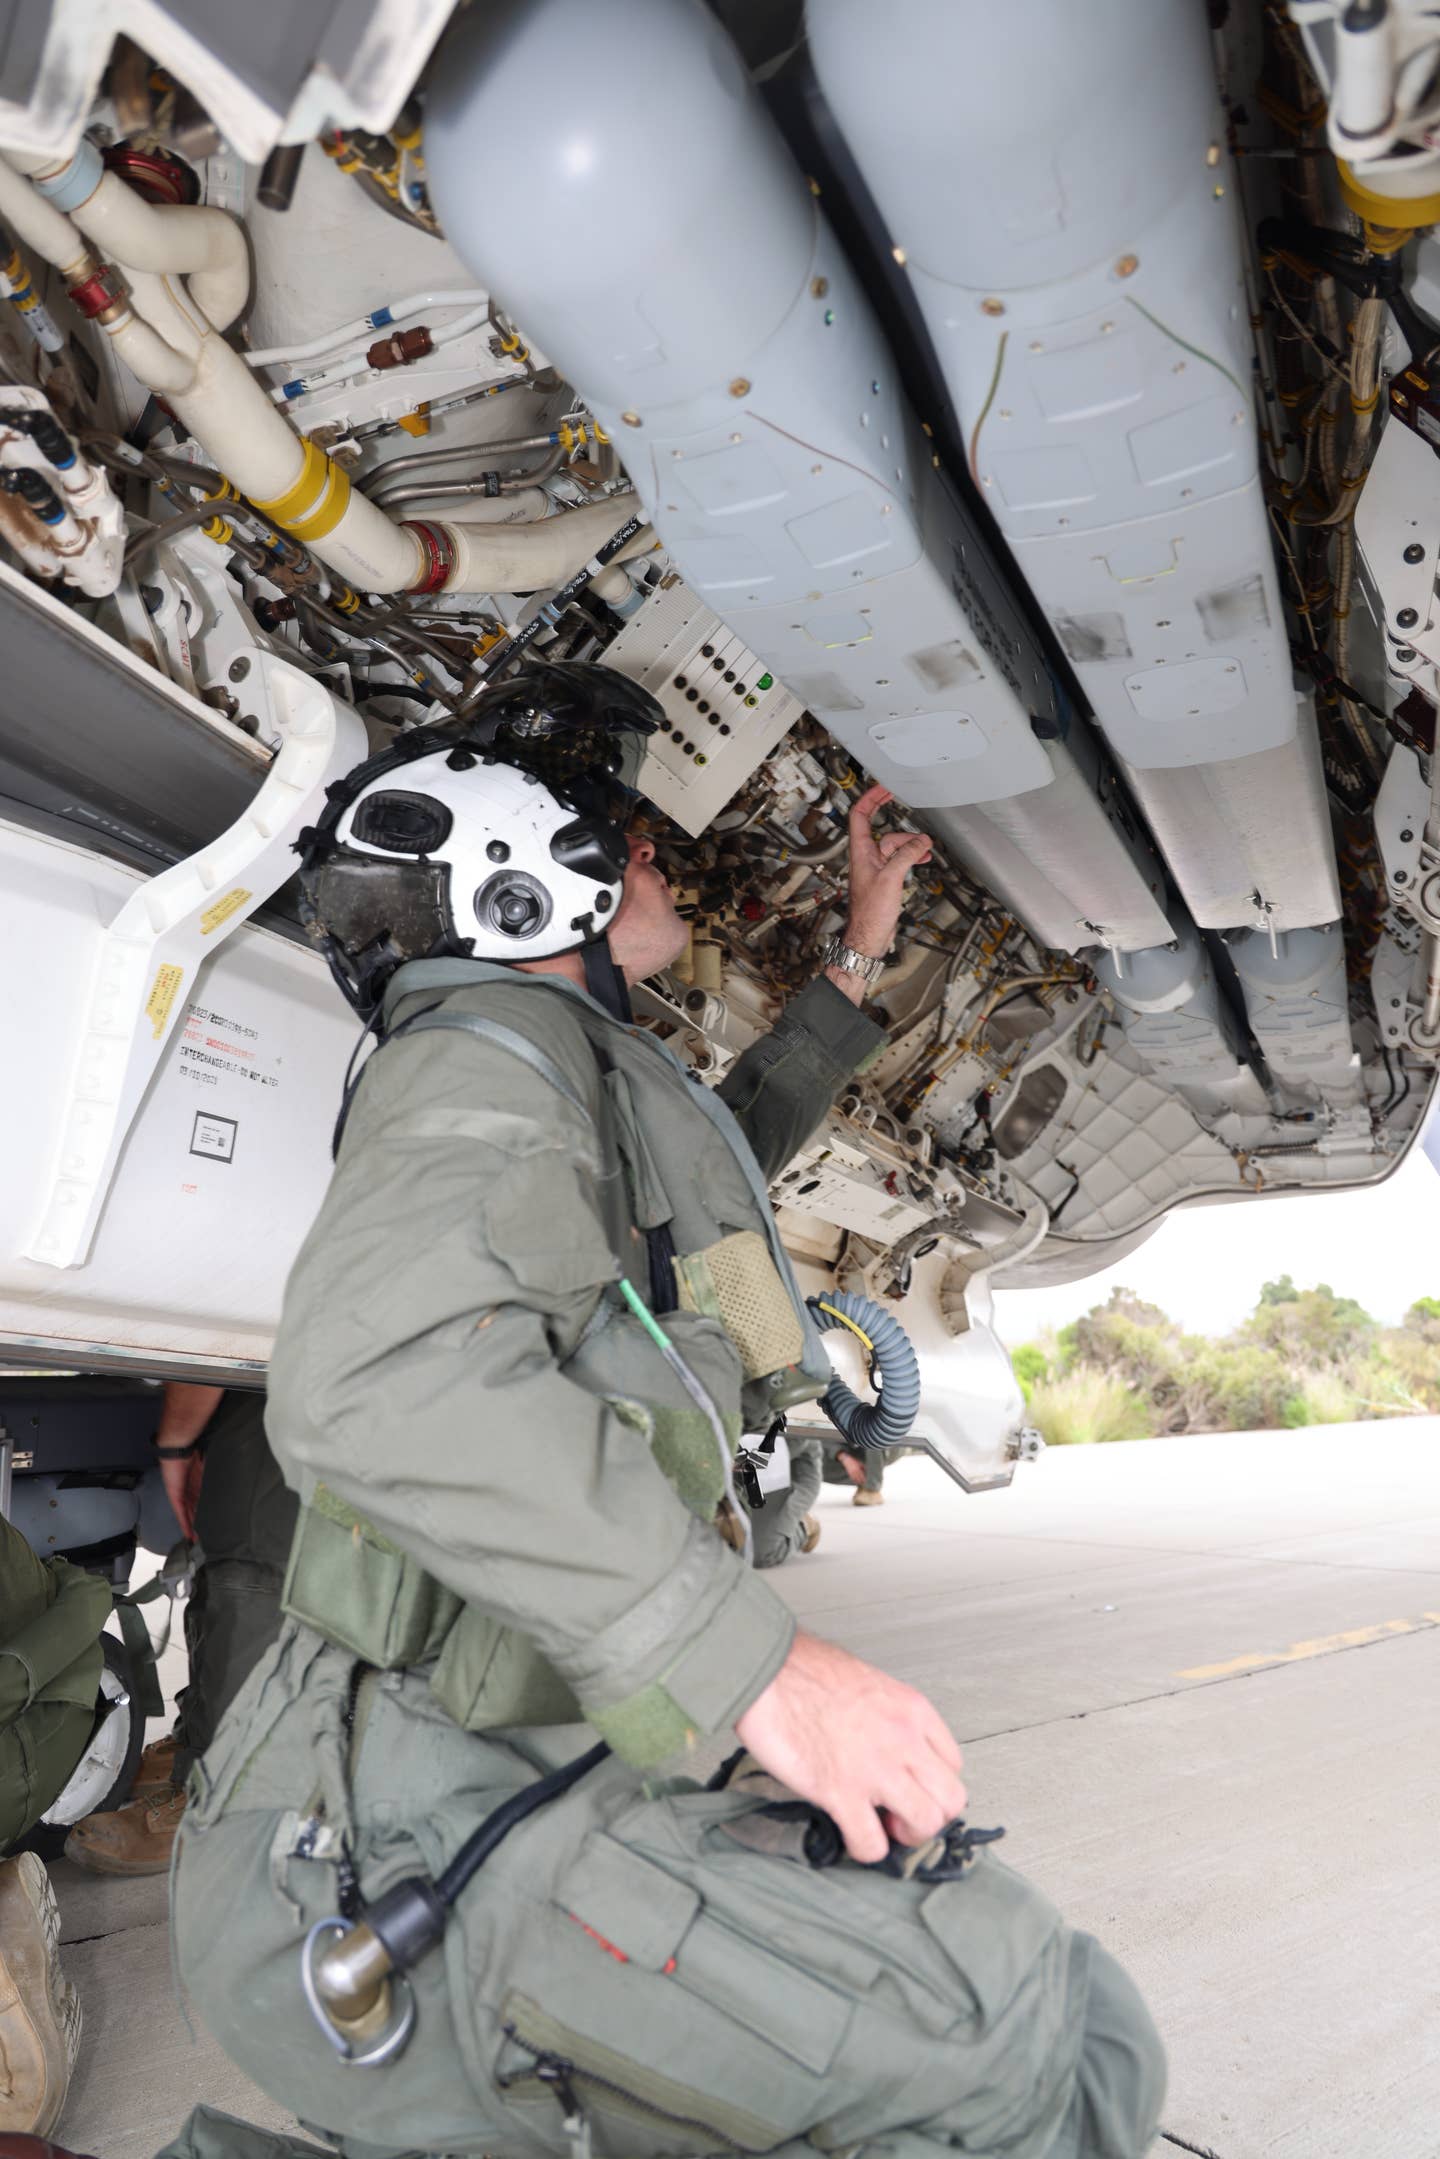 A VMX-1 pilot inspects inert SDB IIs loaded into the F-35B's weapons bay during Obsidian Iceberg, (James Deboer)